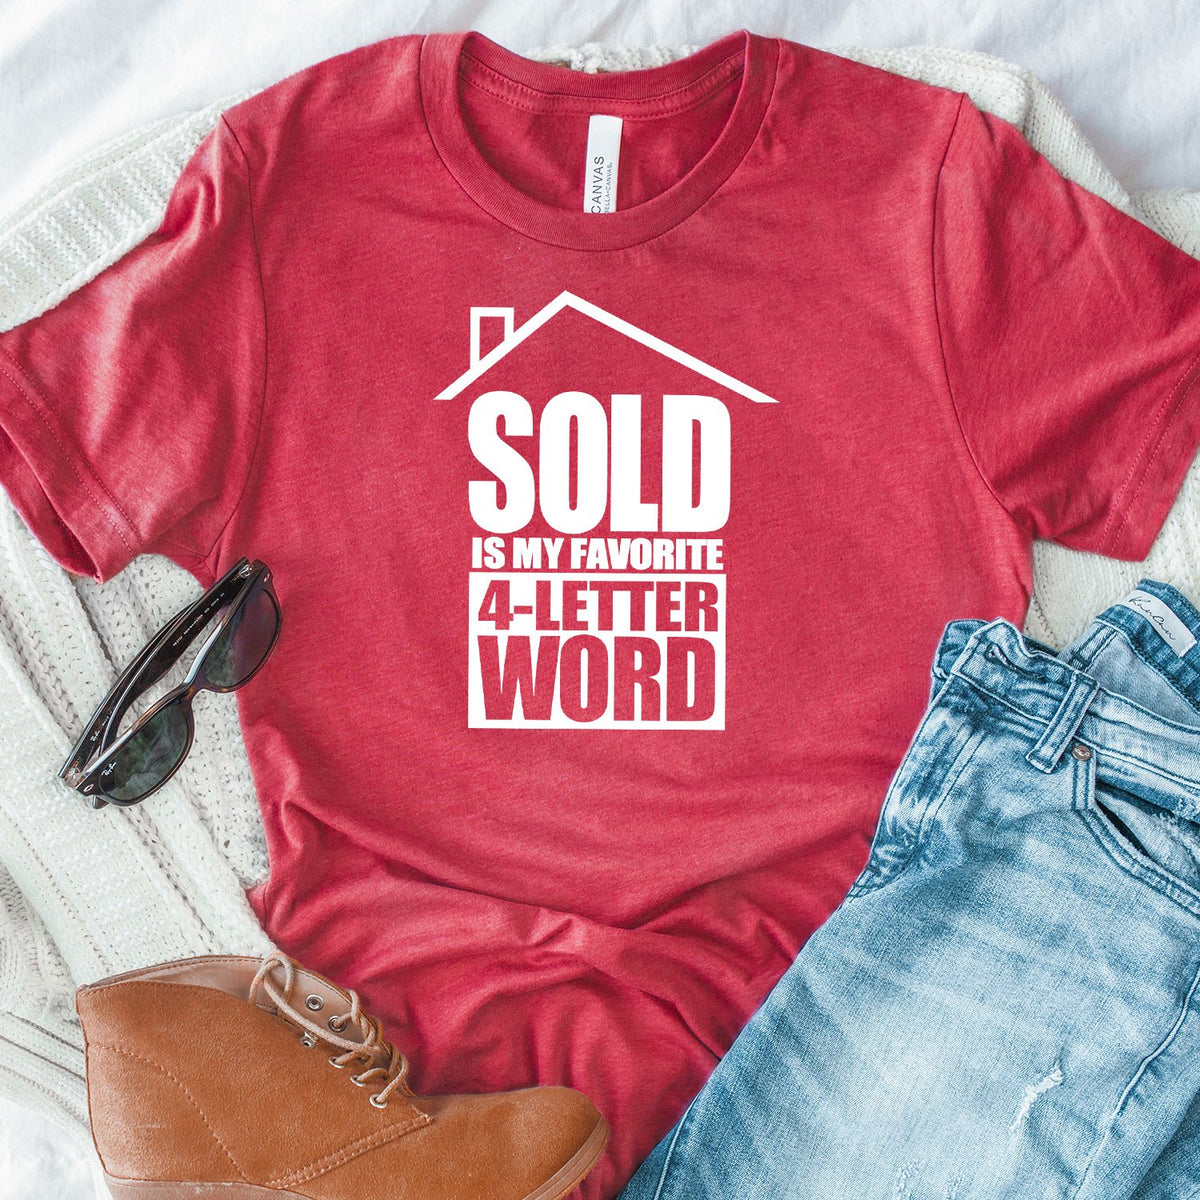 SOLD is My Favorite 4-Letter Word - Short Sleeve Tee Shirt